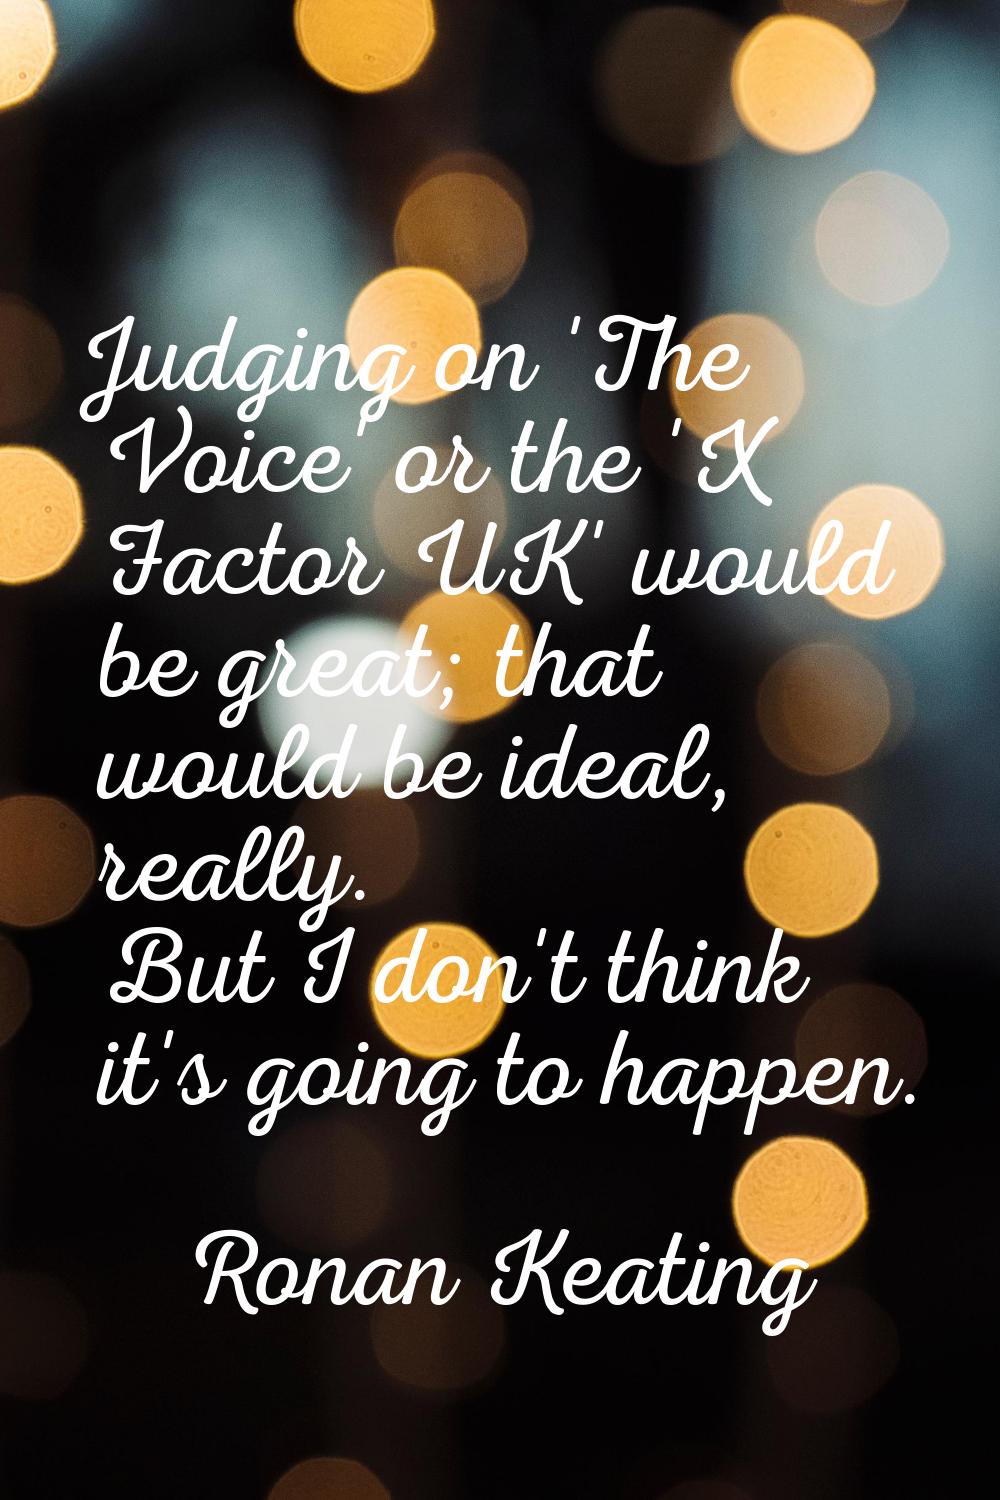 Judging on 'The Voice' or the 'X Factor UK' would be great; that would be ideal, really. But I don'